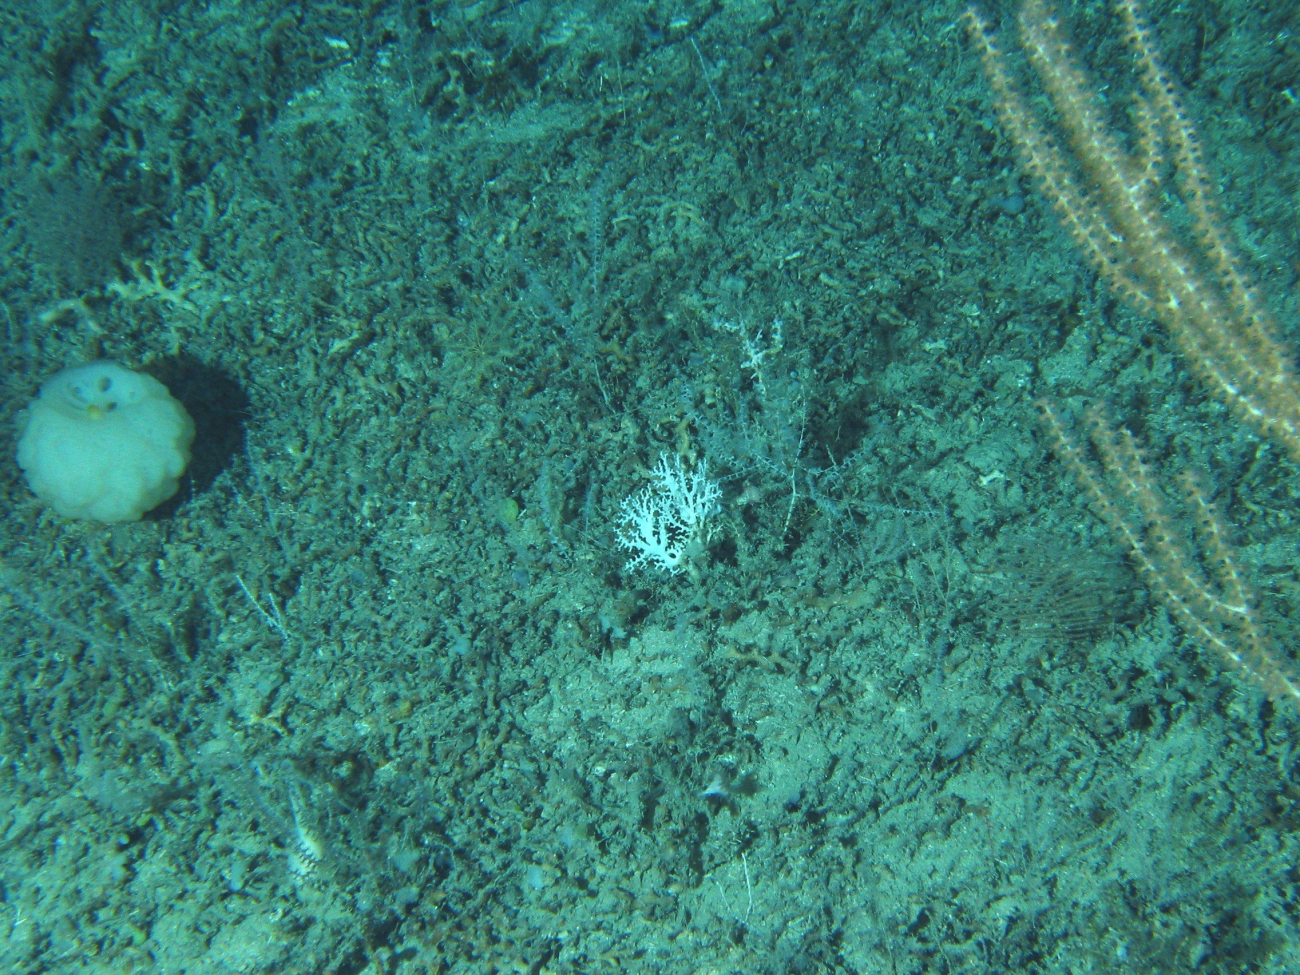 A small lophelia coral in the center with a white sponge to left and a fewbranches of a bamboo coral to the right